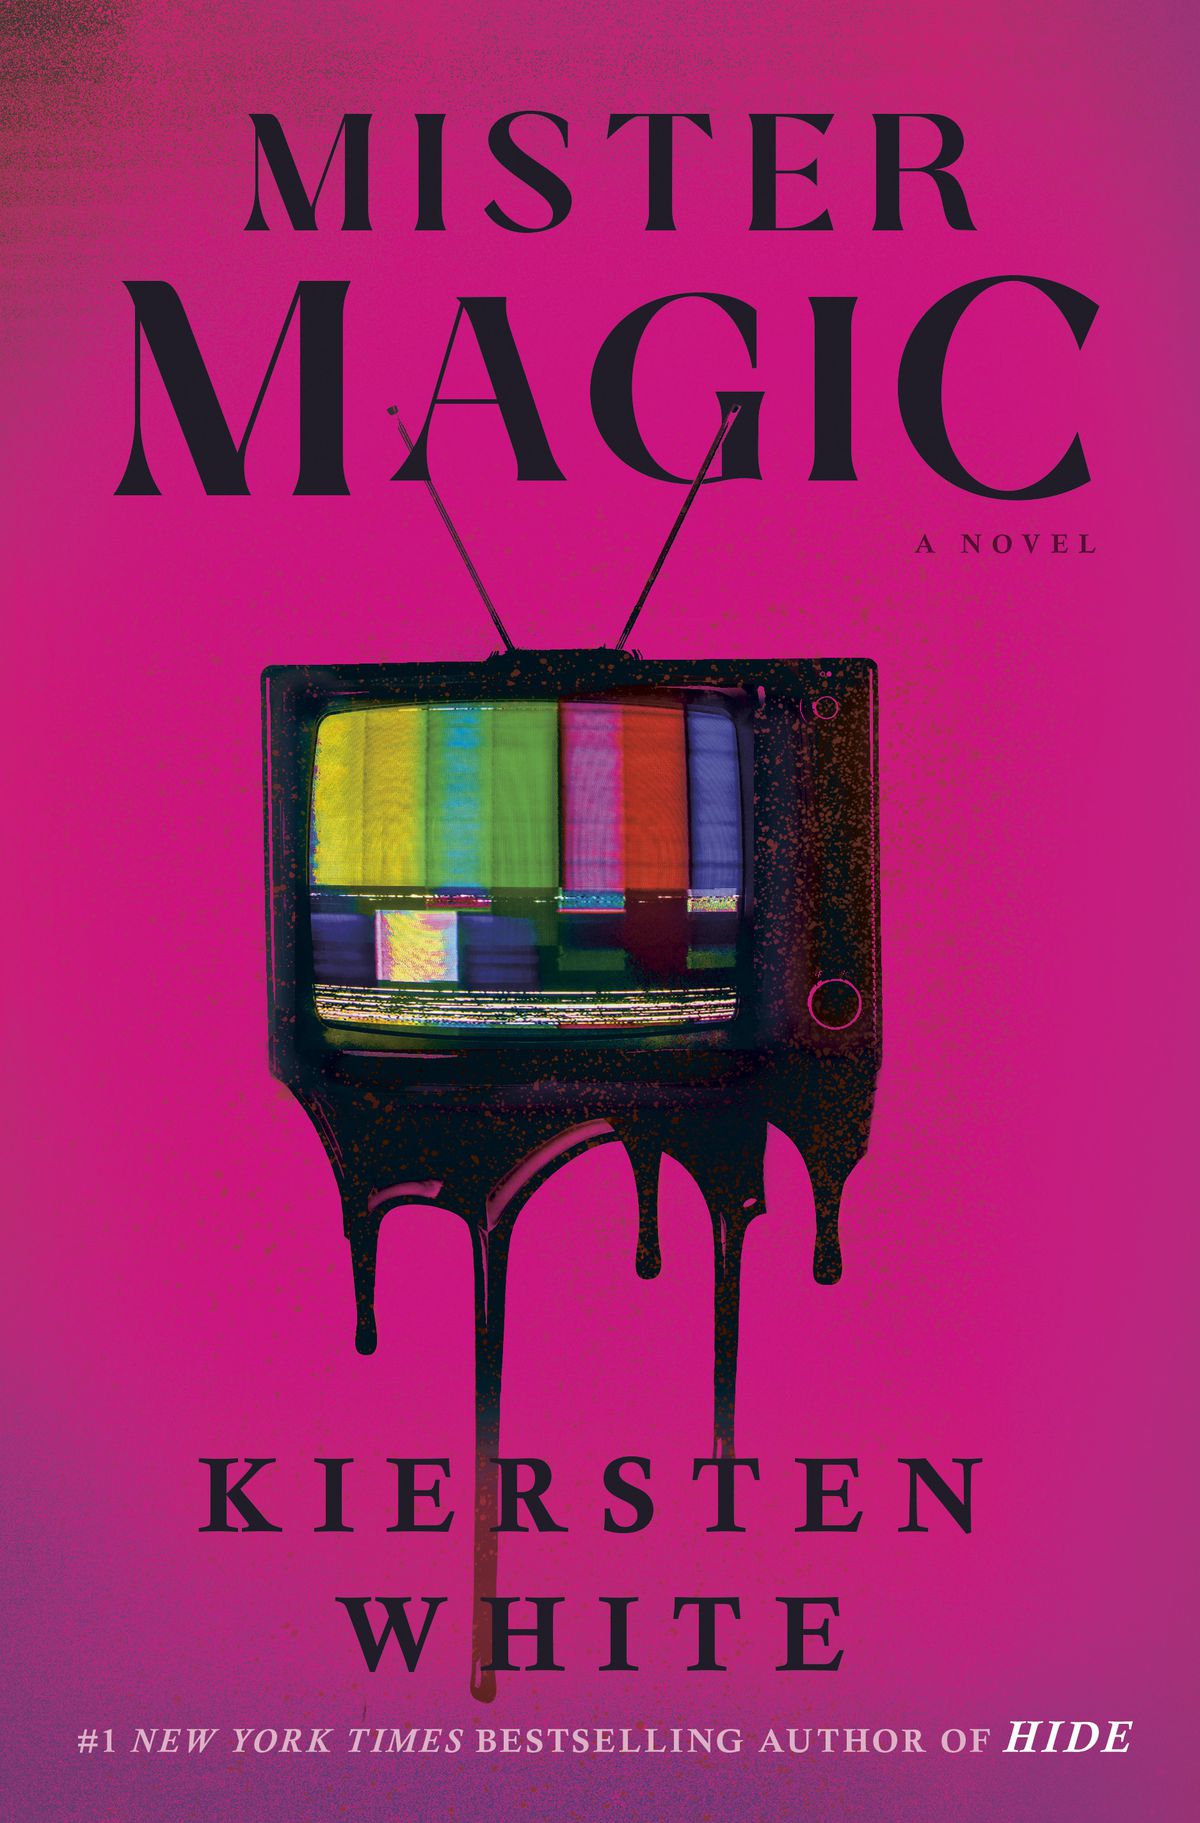 Cover art for Kiersten White’s Mister Magic, which features a melting television against a pink background.